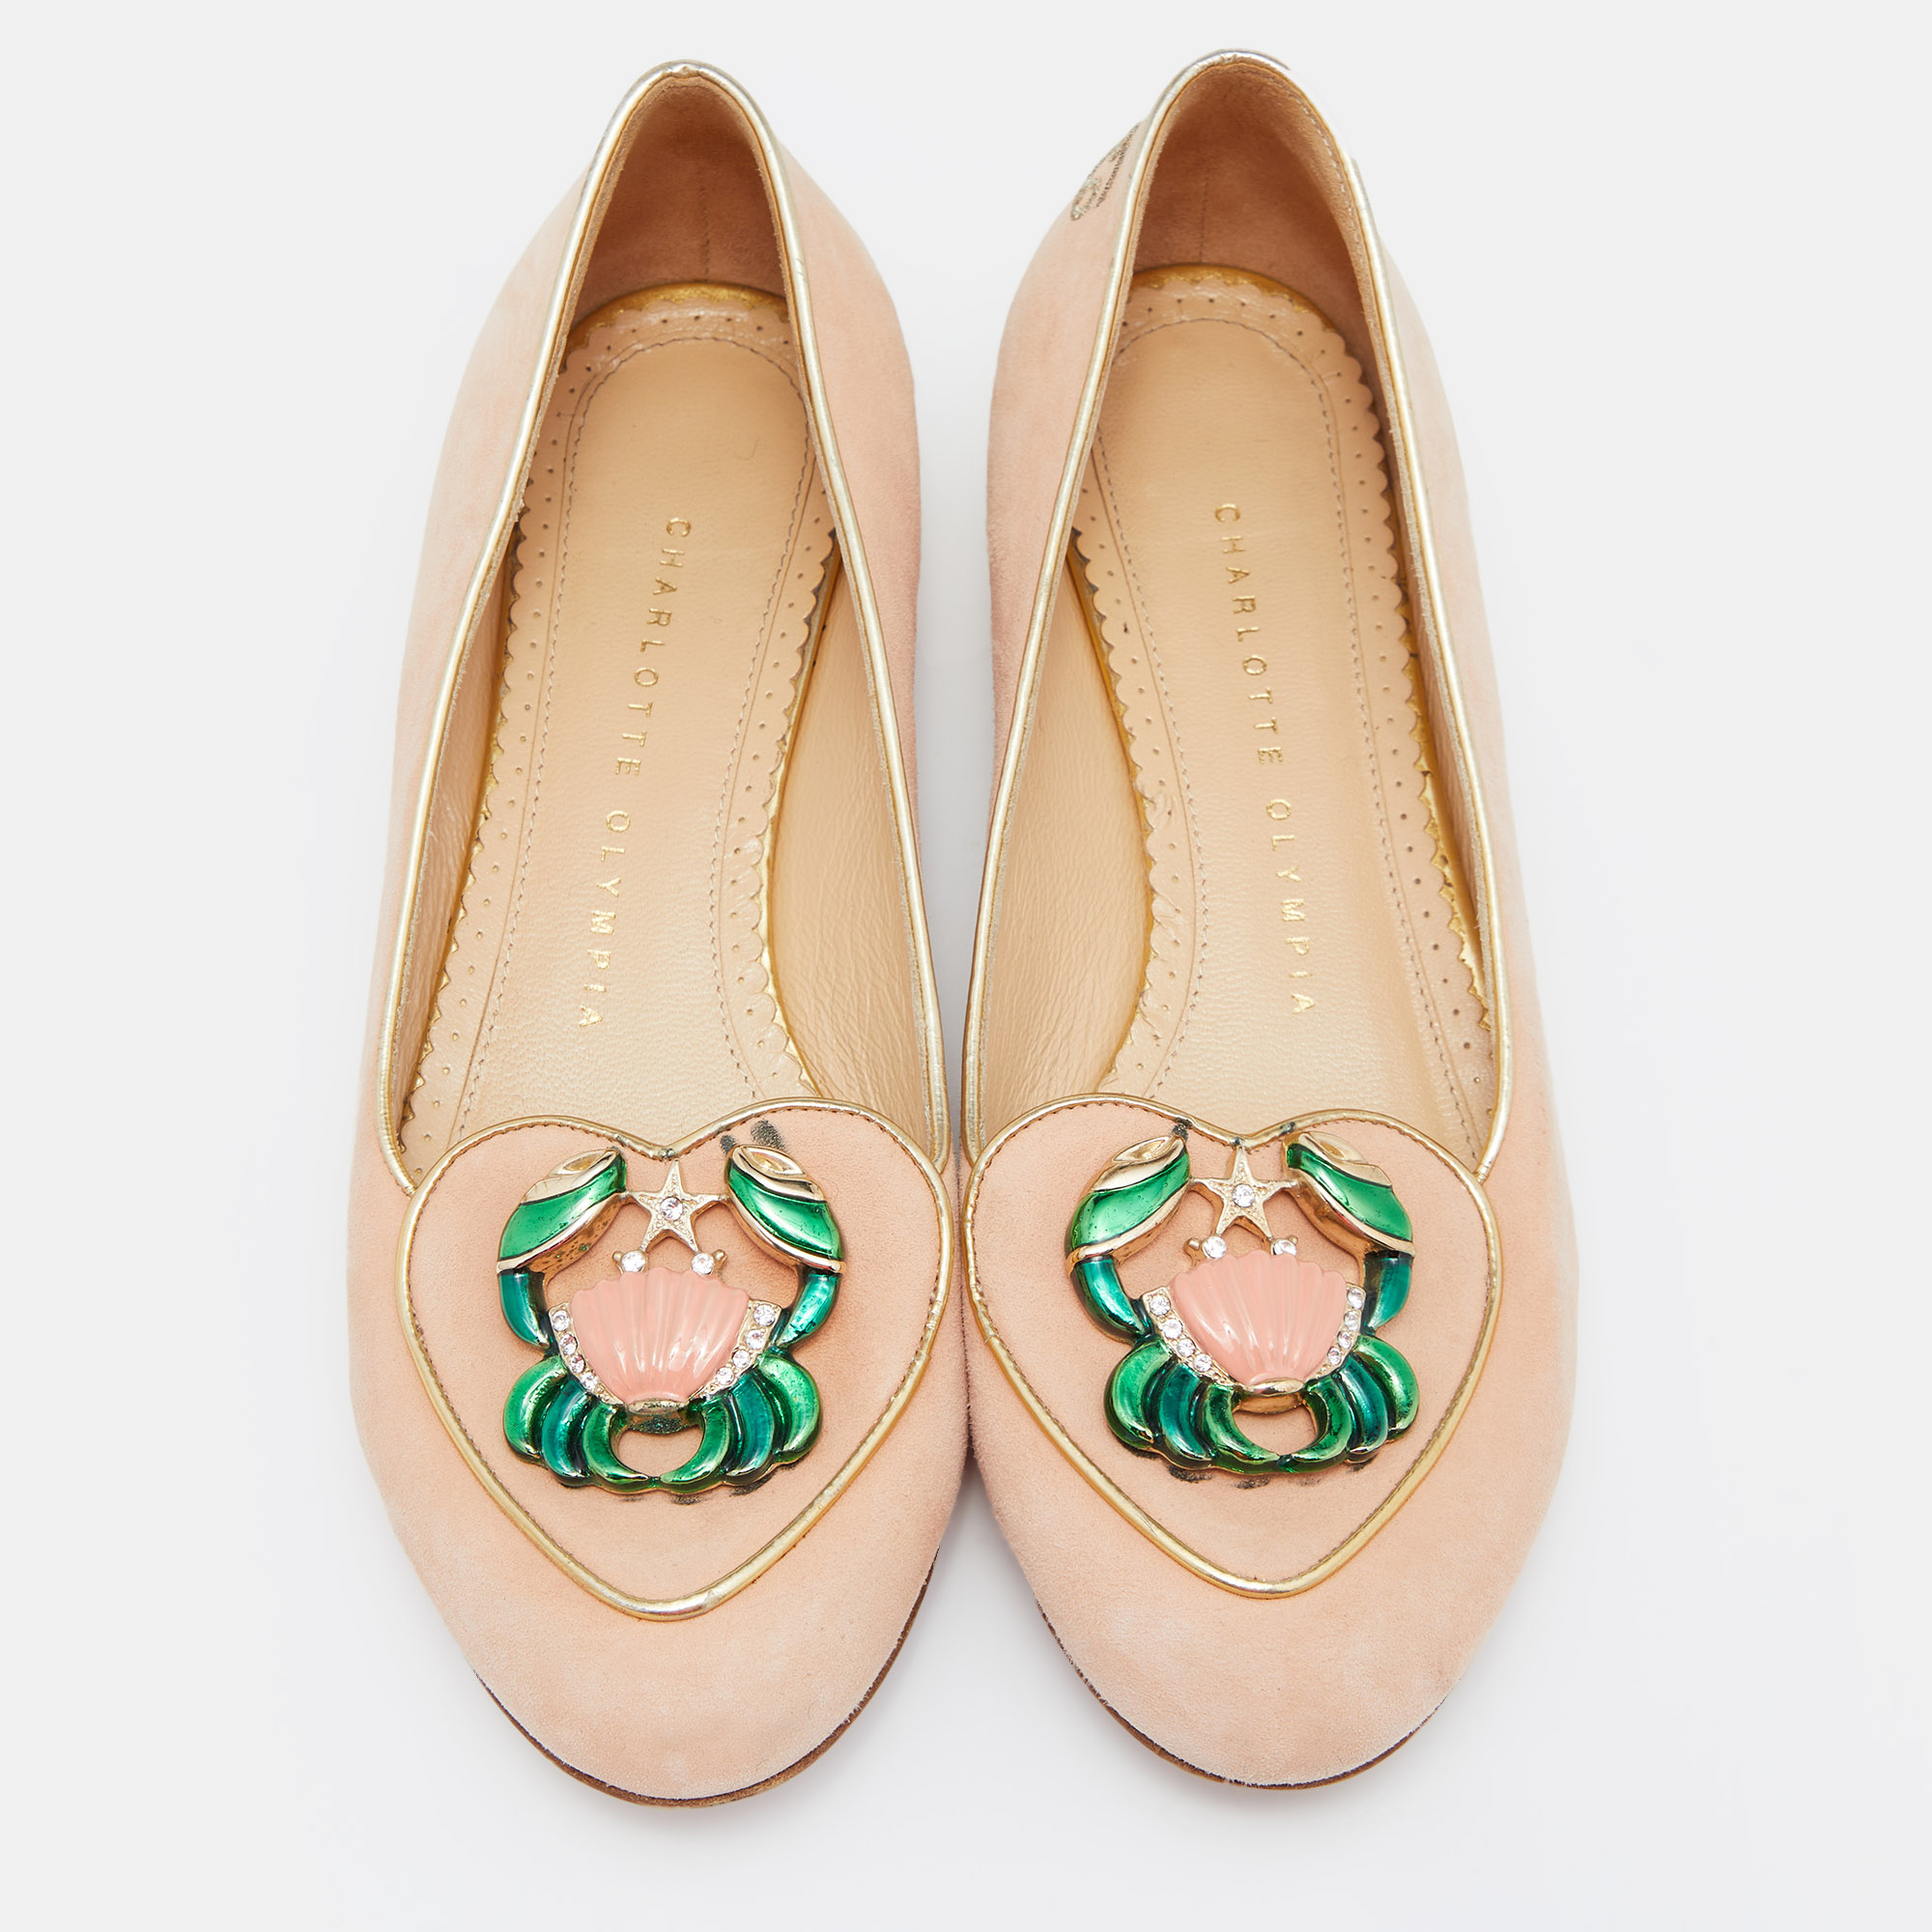 Charlotte Olympia Peach/Gold Suede Cancer Smoking Slippers Size 36